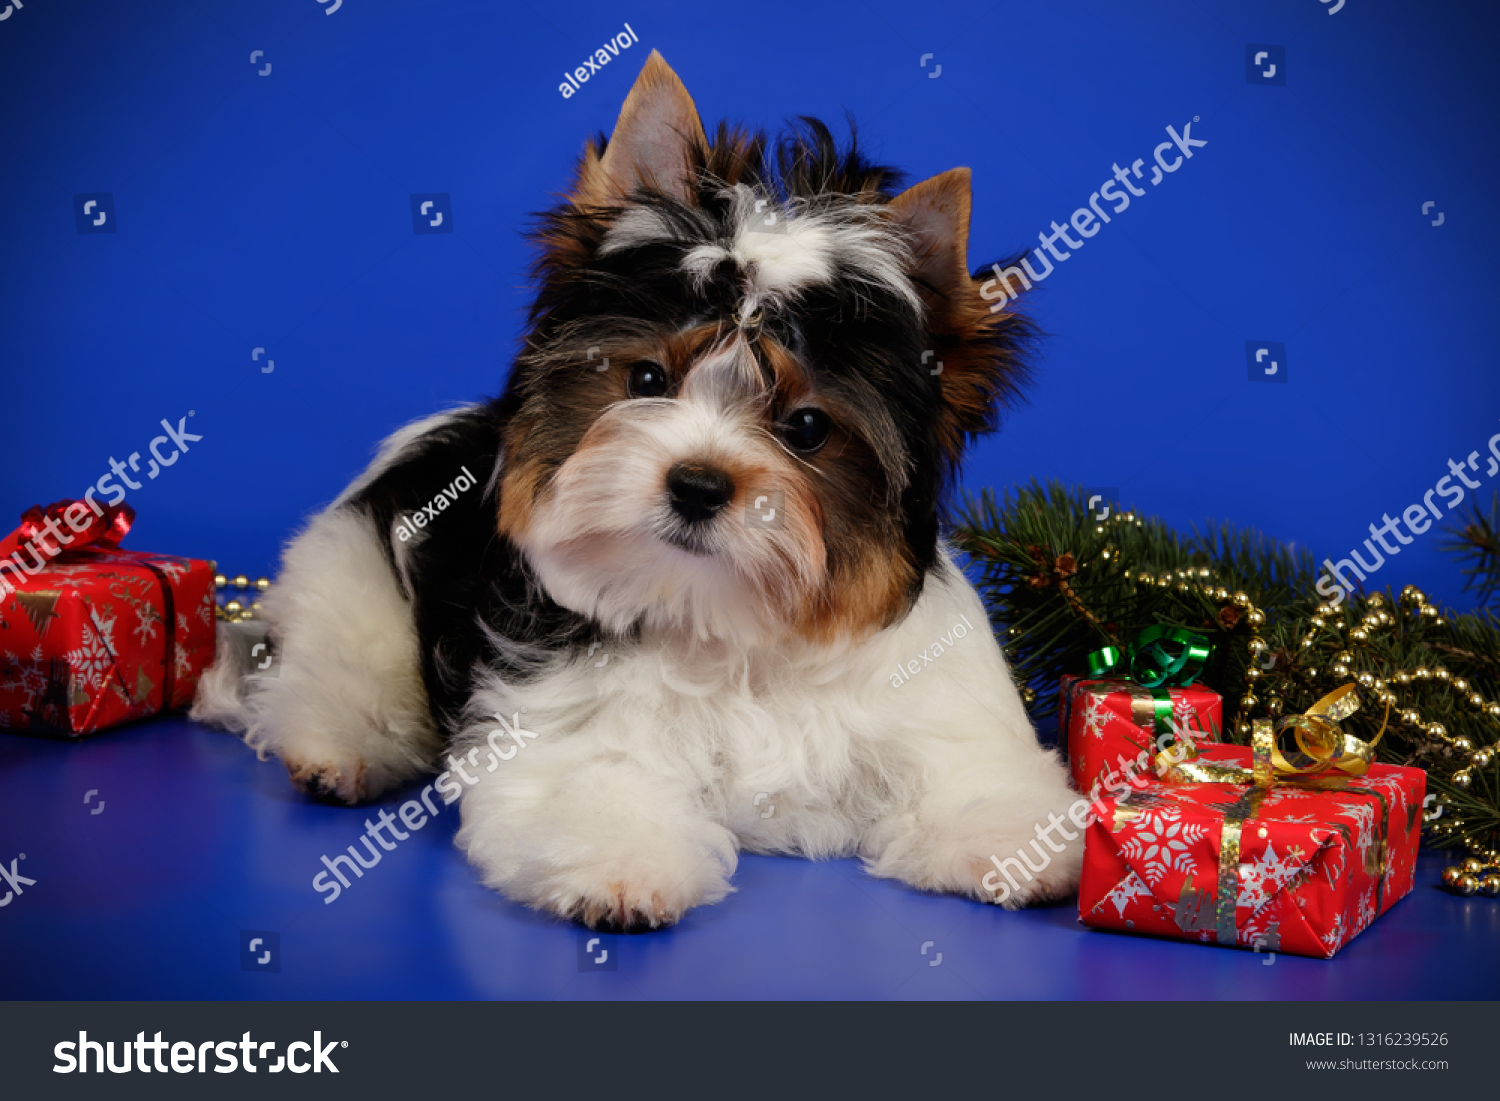 Christmas Biewer Yorkshire Terrier On Colored Stock Photo Edit Now 1316239526